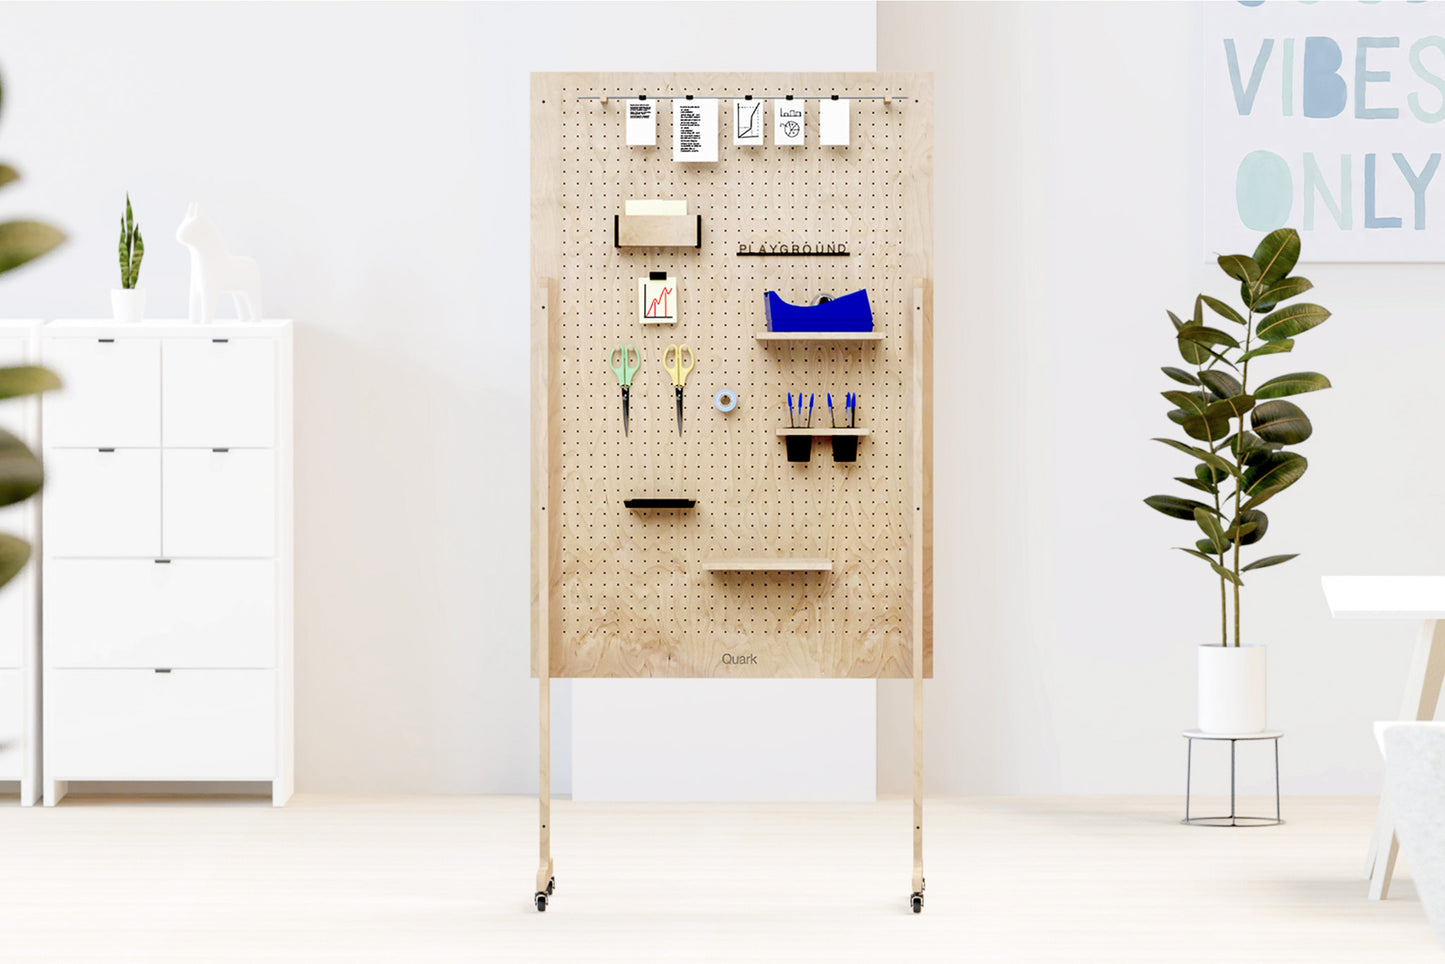 Pegboard FlexiMove: The mobile wall on casters made in France